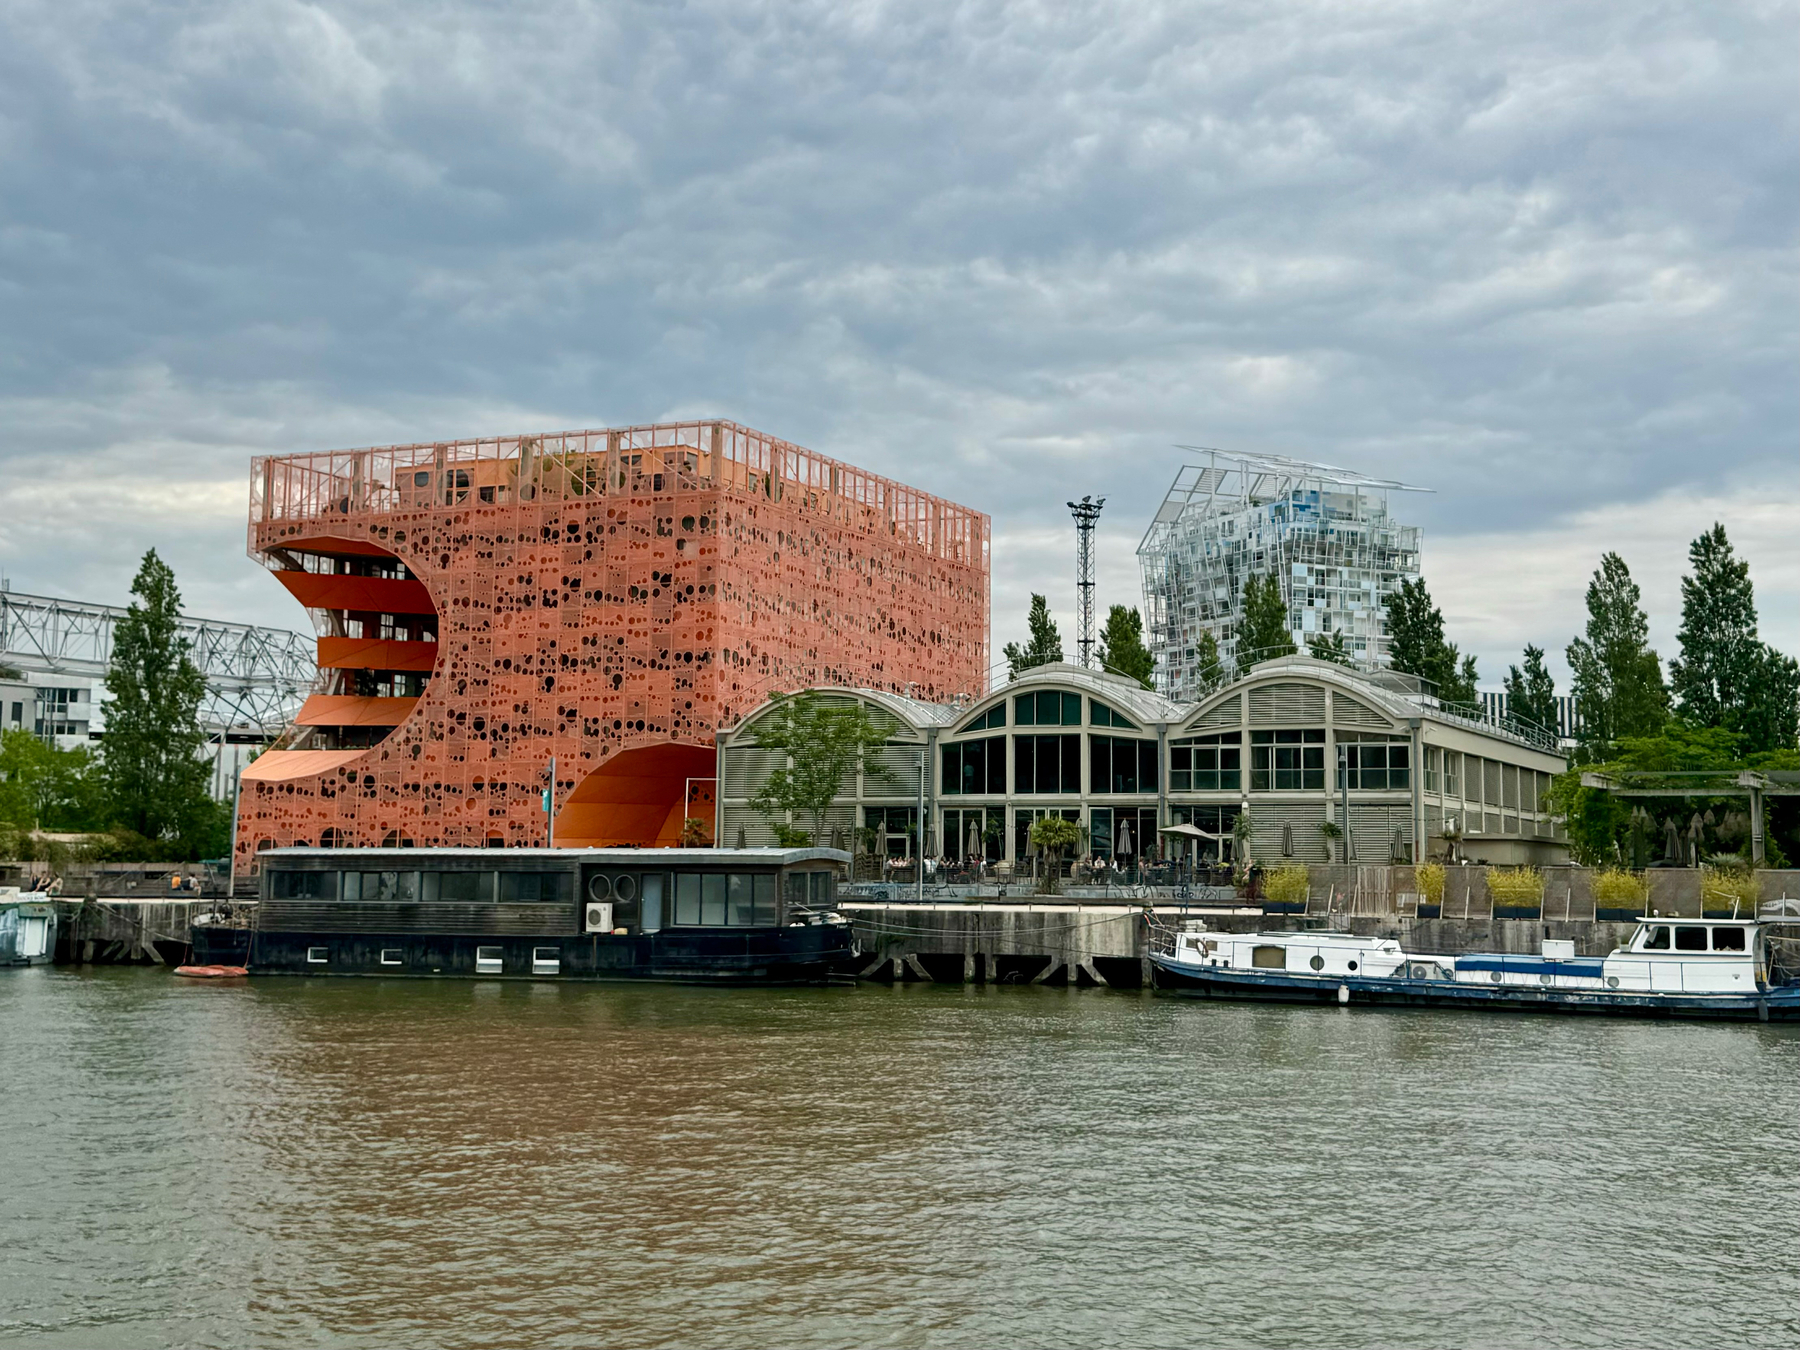 The image shows a riverside view with modern buildings, including a distinctive orange building with a unique perforated facade and a spiral staircase on its exterior. Behind it is a building with an intricate geometric glass structure on its top. There are boats moored. 